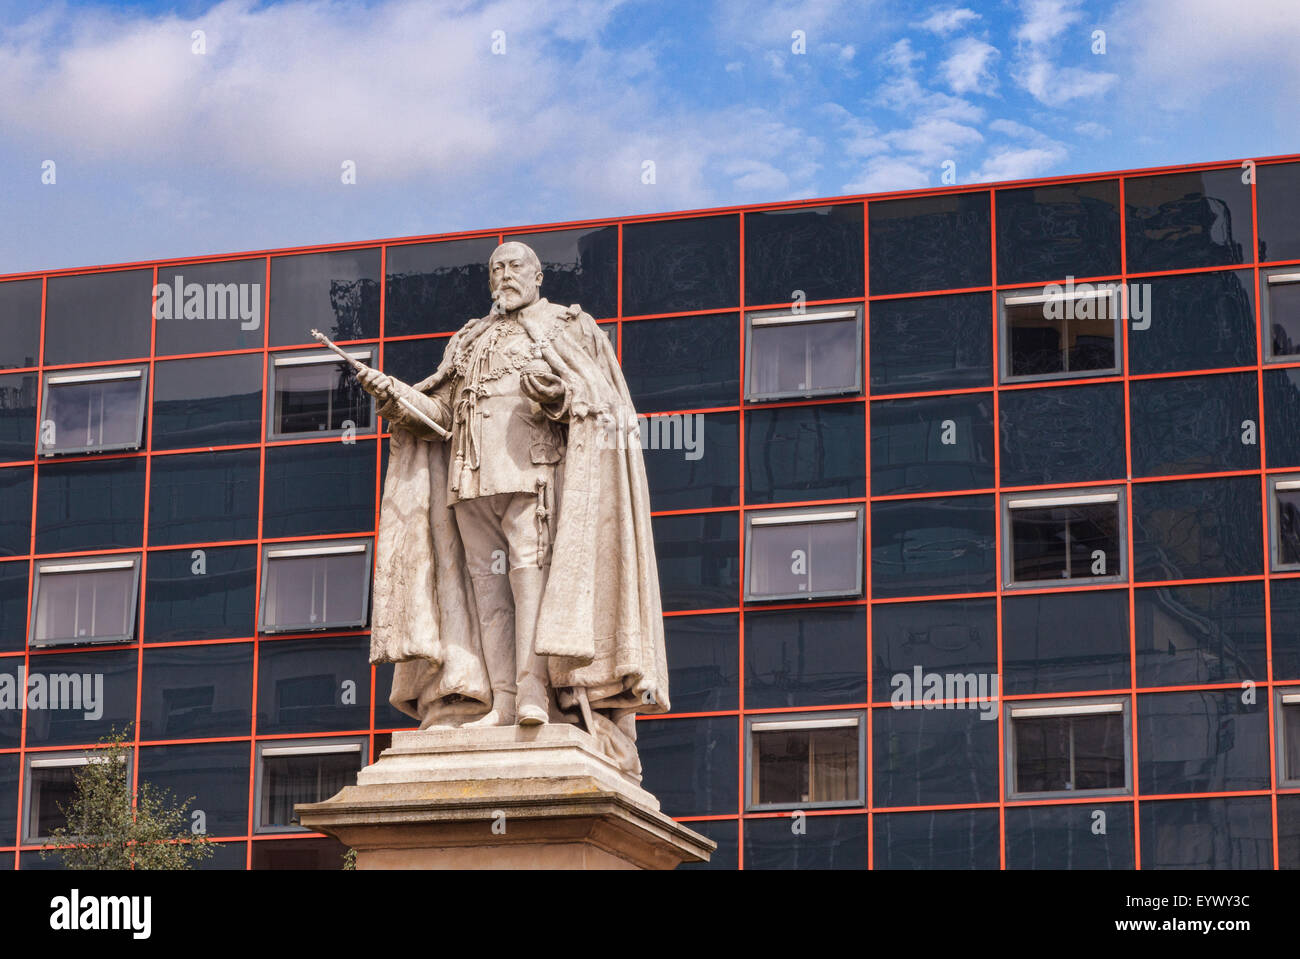 Statue of Edward VII in central Birmingham, West Midlands, England Stock Photo